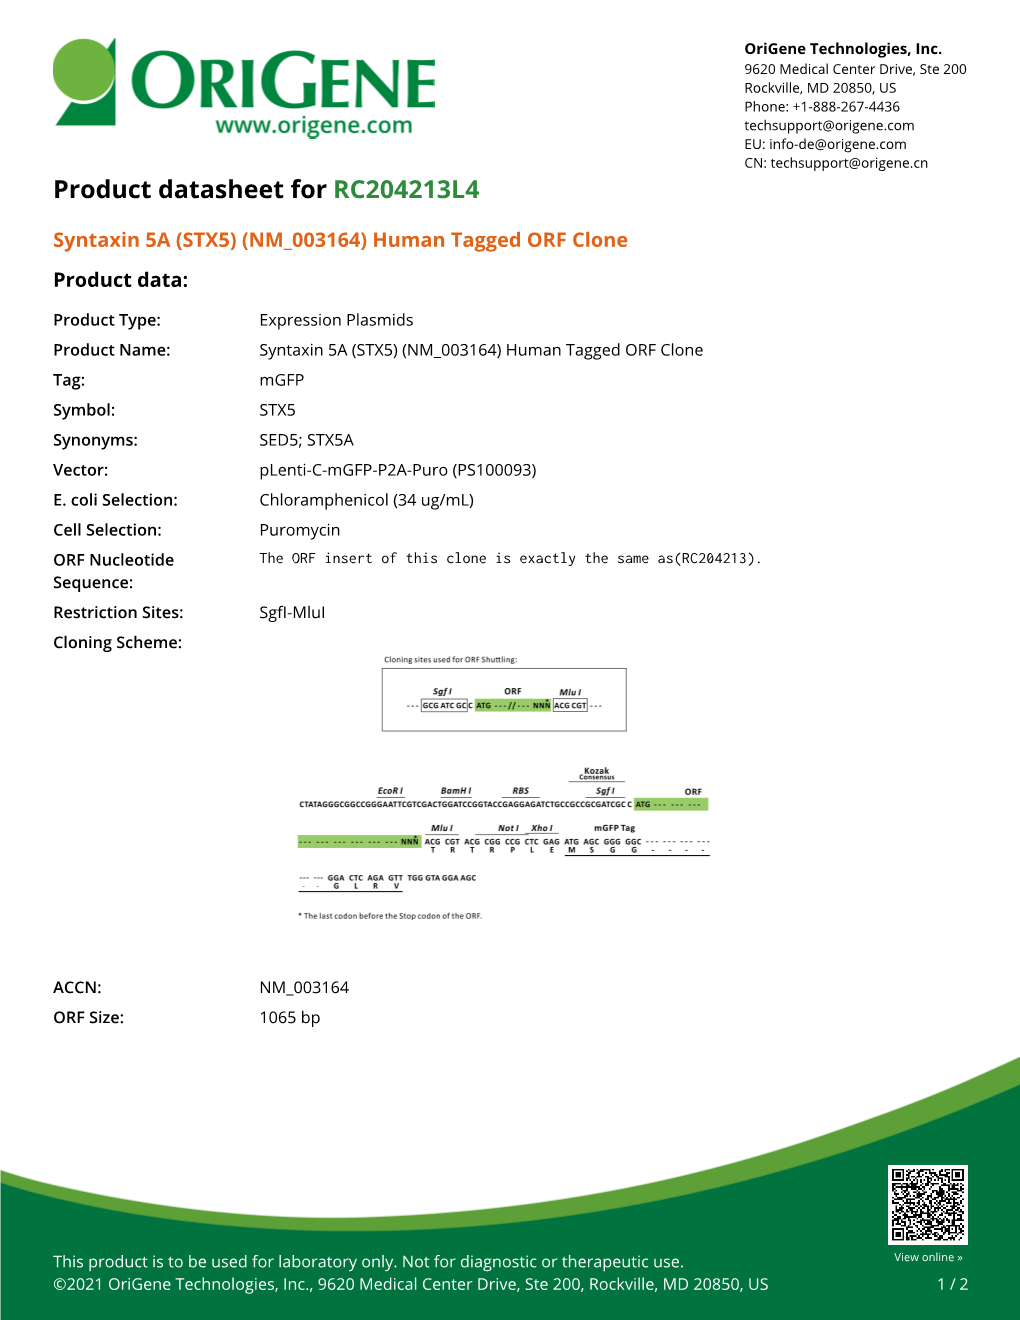 (STX5) (NM 003164) Human Tagged ORF Clone Product Data